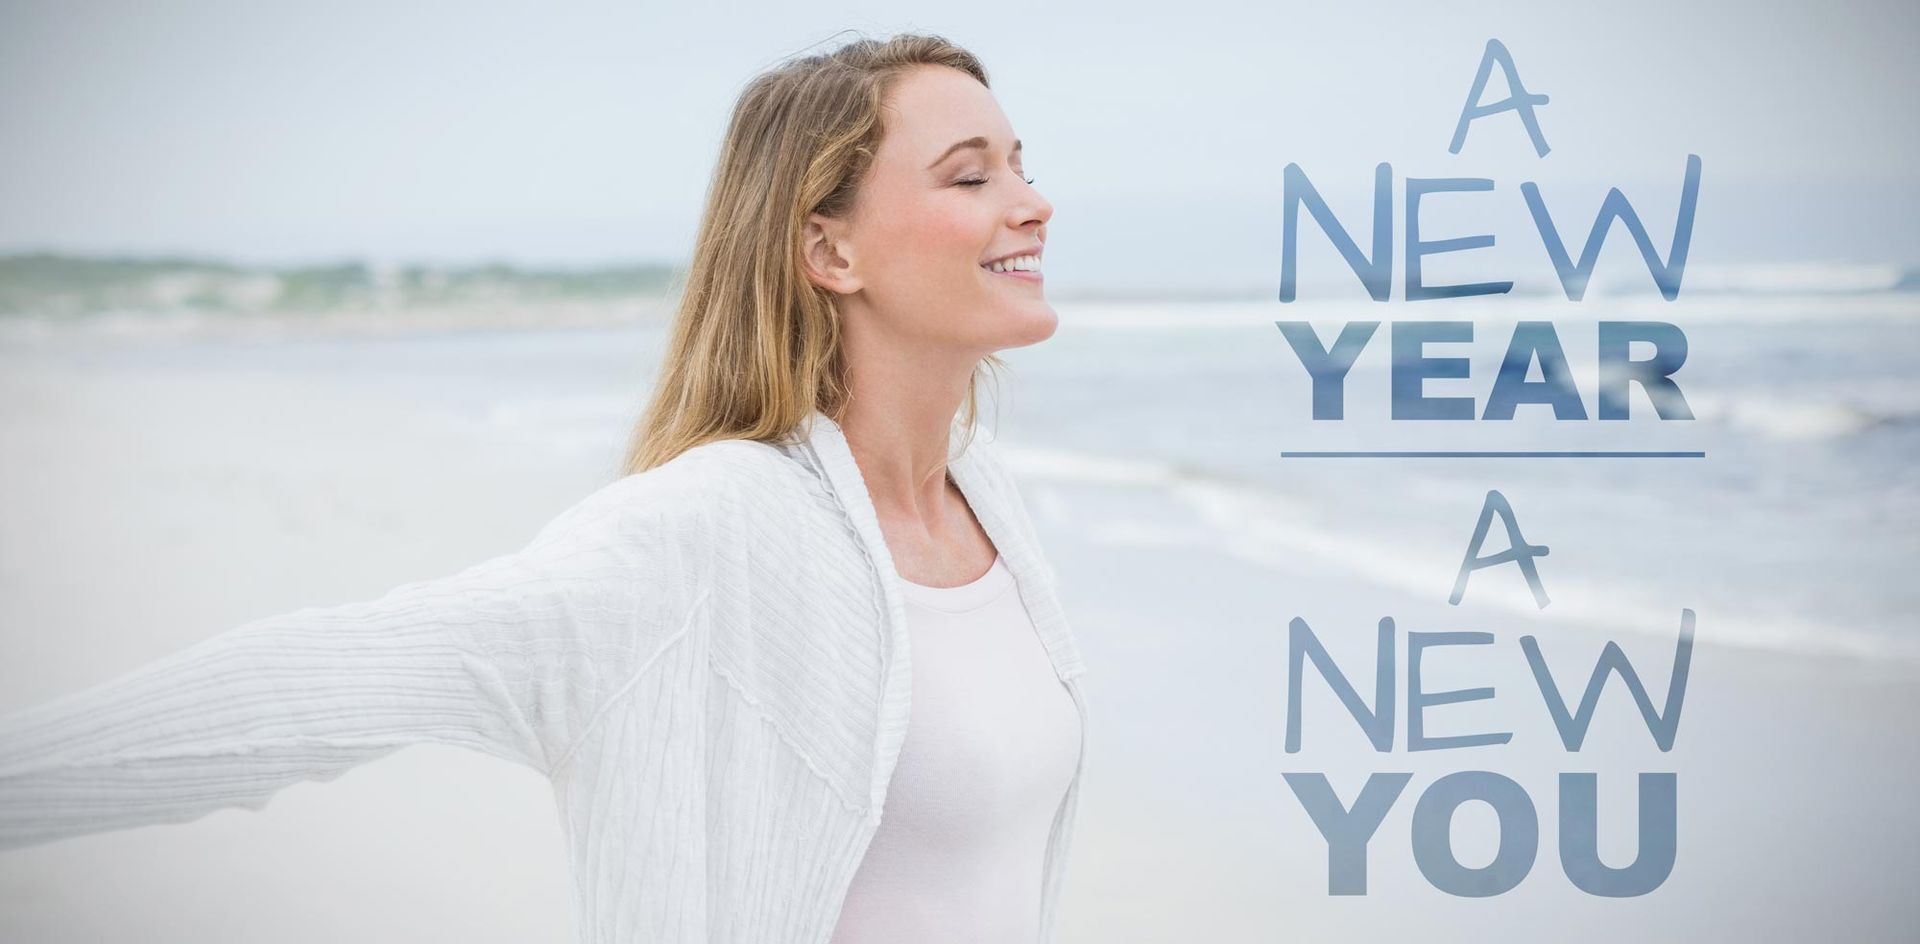 Holistic New Year Resolutions - 24 Things To Consider by Dr. Alicia Armitstead. Guidelines To Set Goals to Improve Your Health For This Year and Beyond